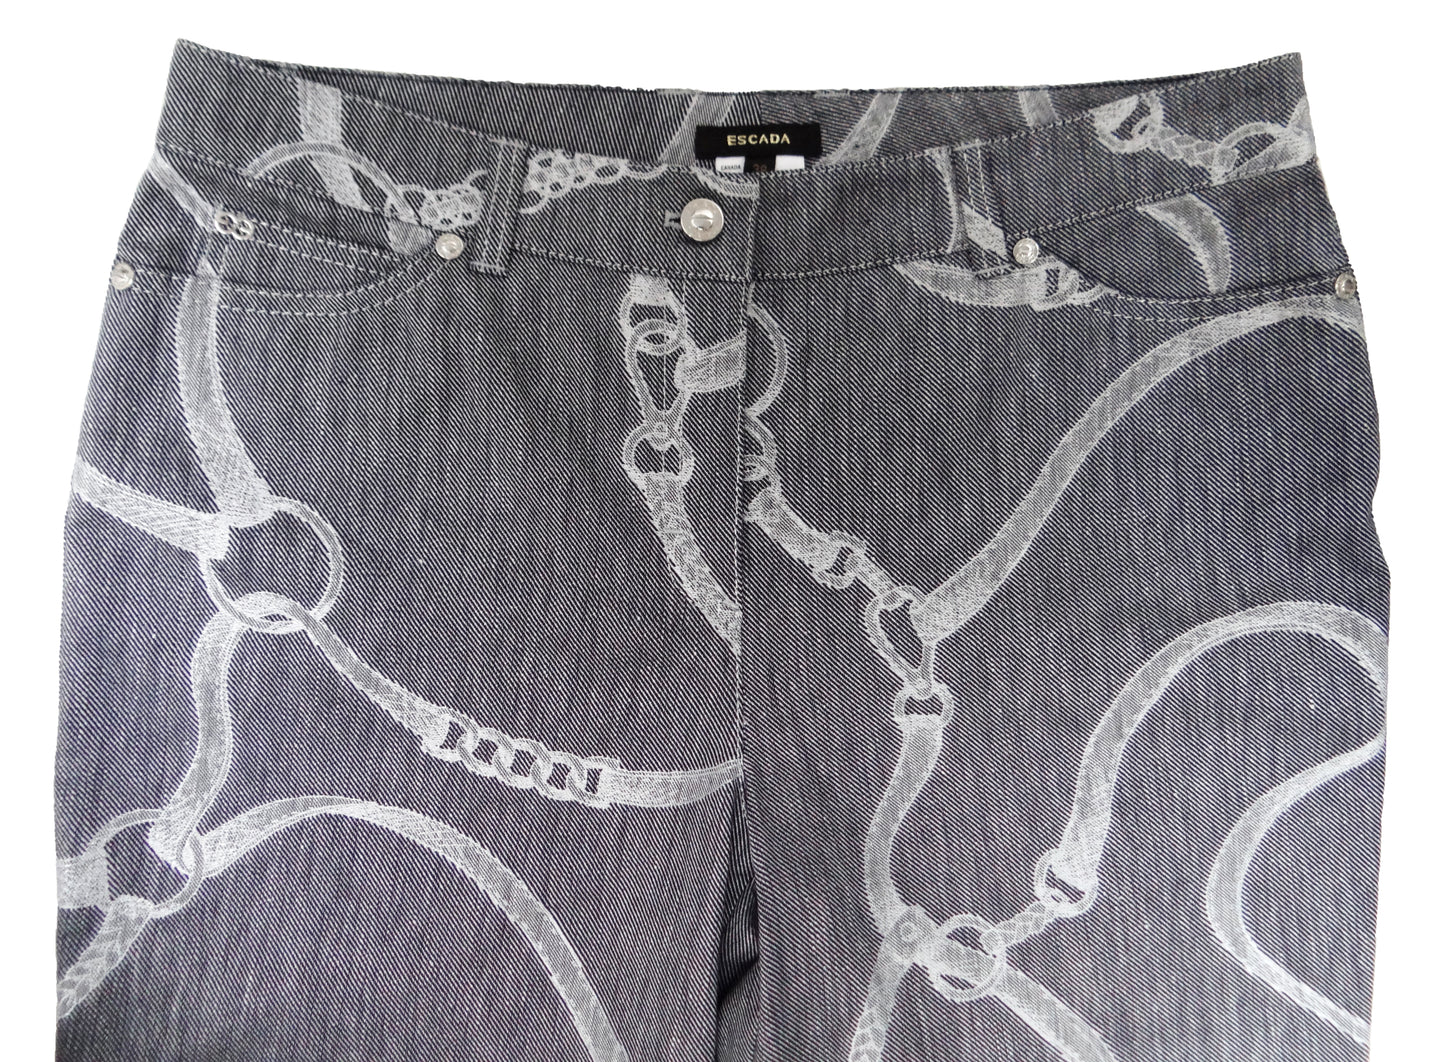 Escada Jeans with Chain and Belt Pattern, UK12